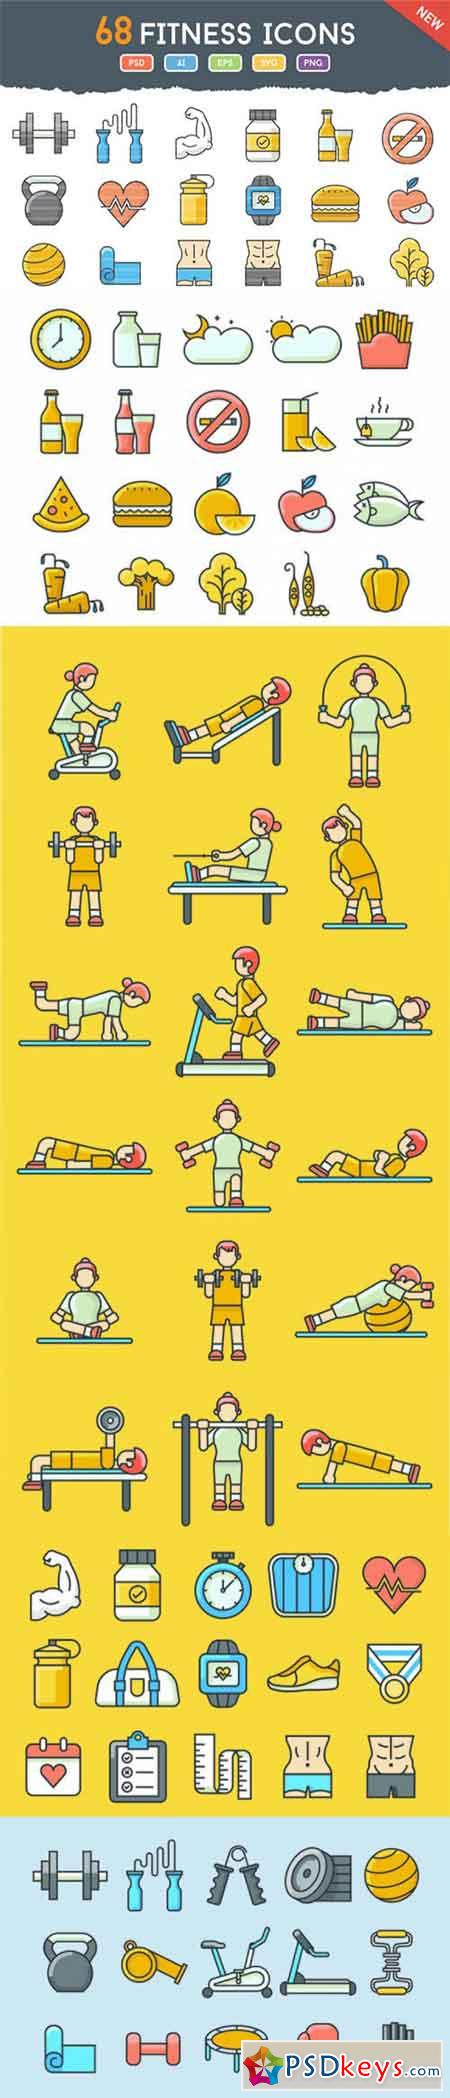 68 Funky Fitness Icons 670348